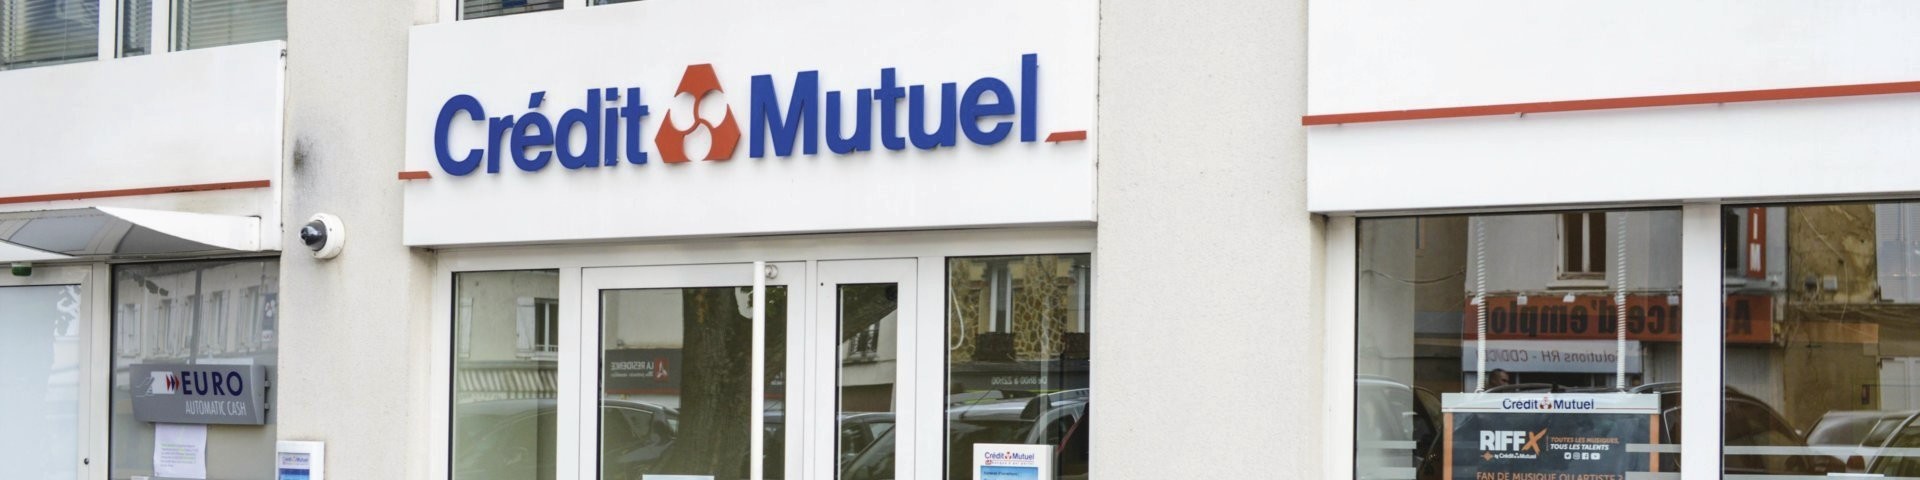 Boutique CREDIT MUTUEL - Mon commerce  Herblay